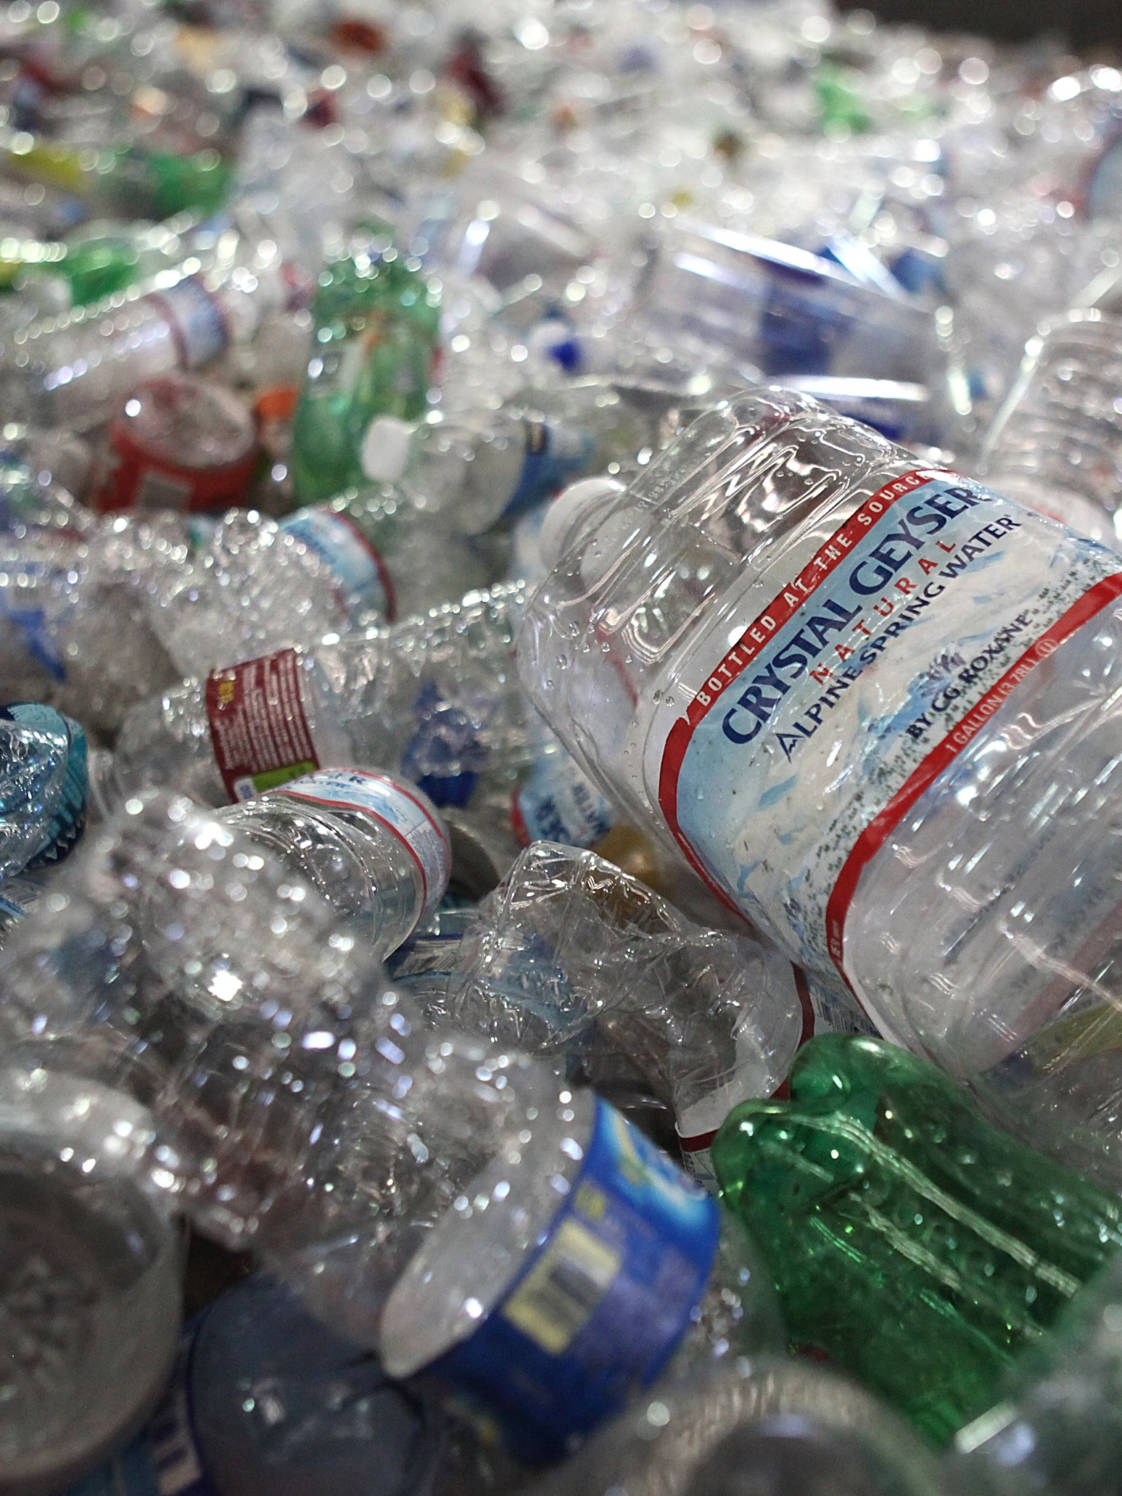 A Future With 100% Recycled Beverage Bottles? A New State Bill